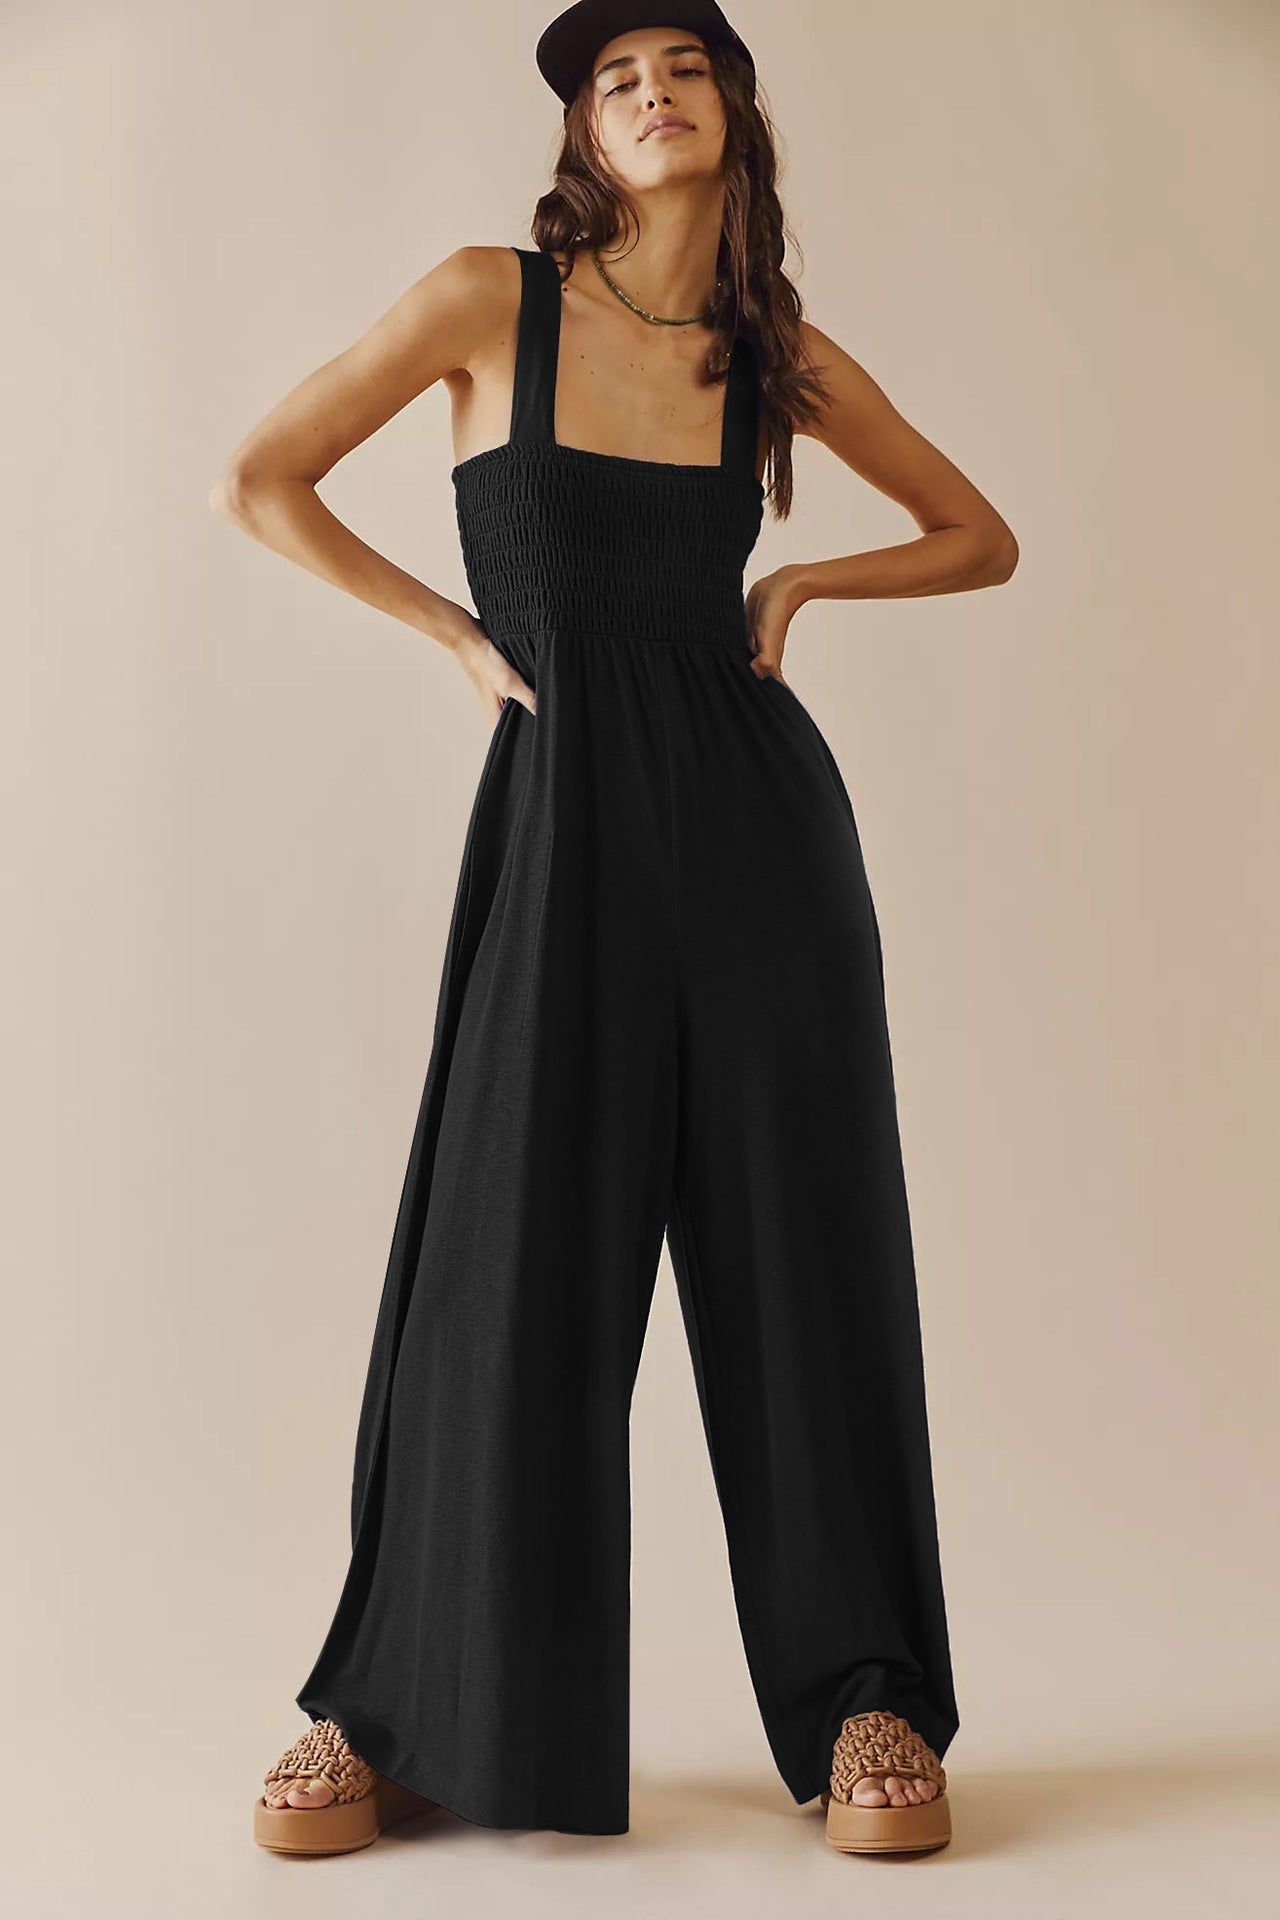 Casual Summer Wide Legs Jumpsuits for Women-Jumpsuits-Free Shipping at meselling99